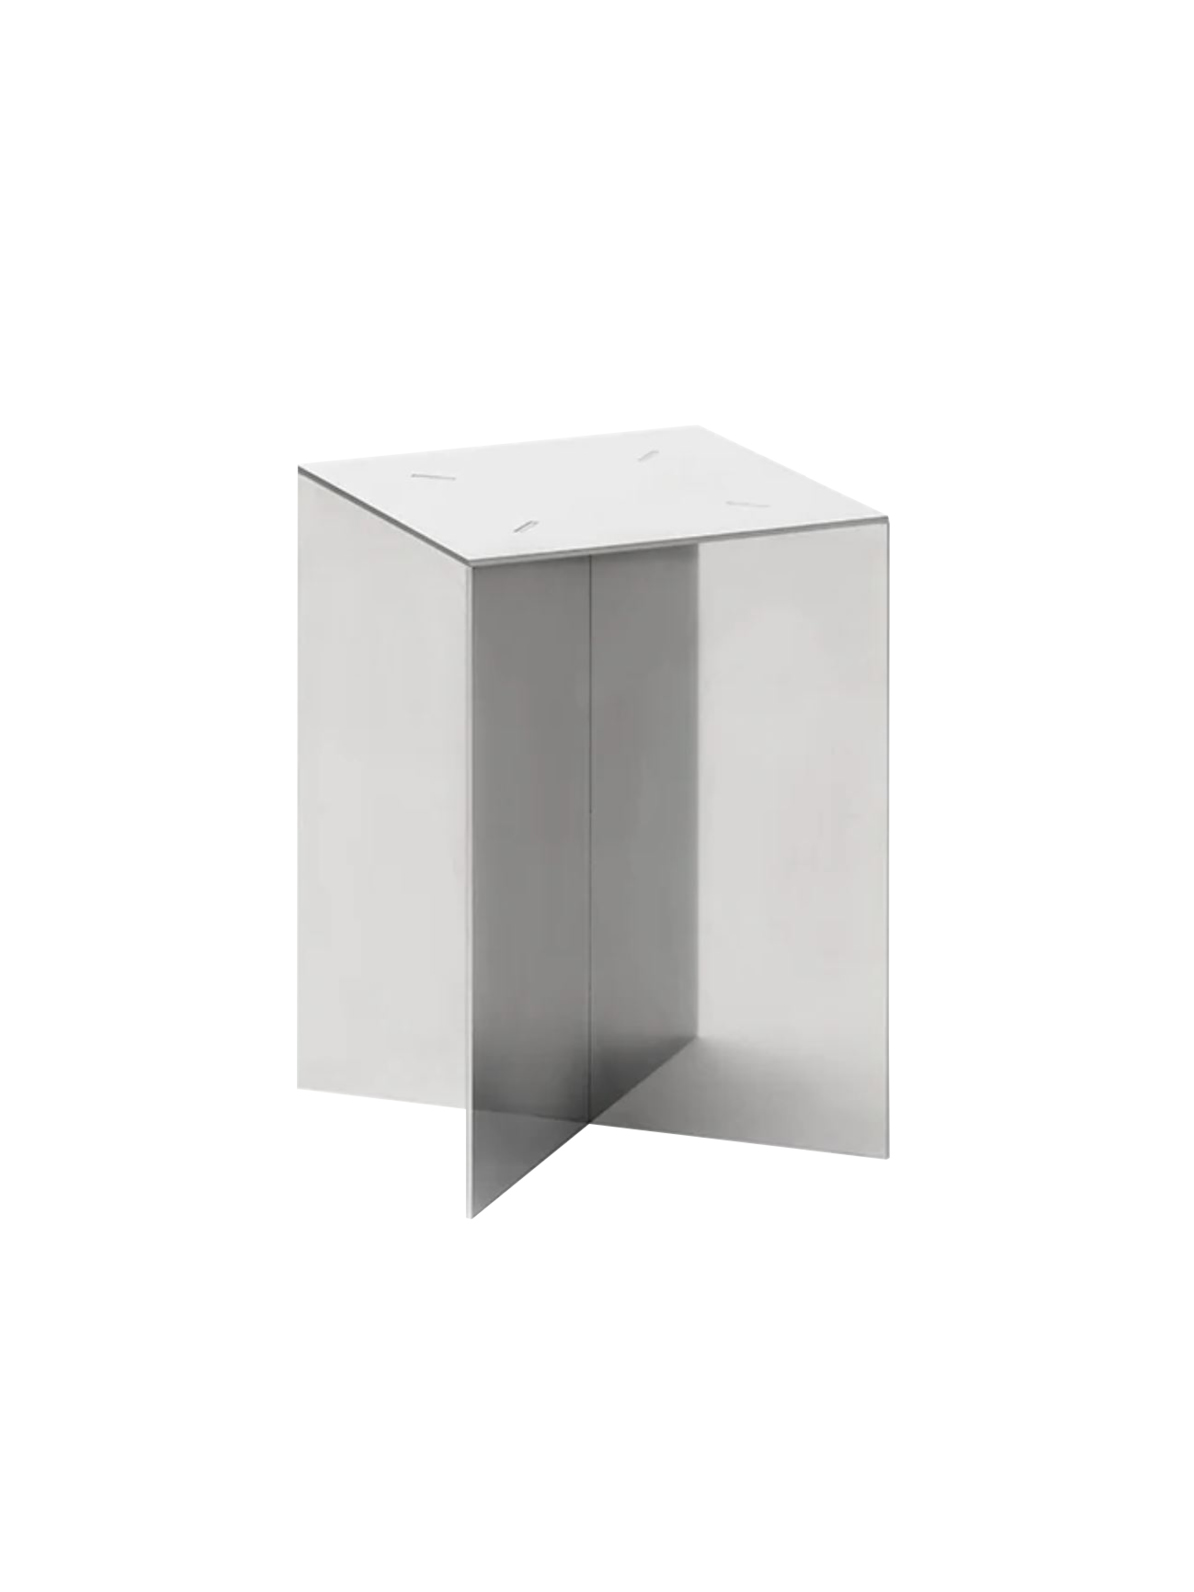 NM3 1.5mm Steel Podiums Table, Exxxential